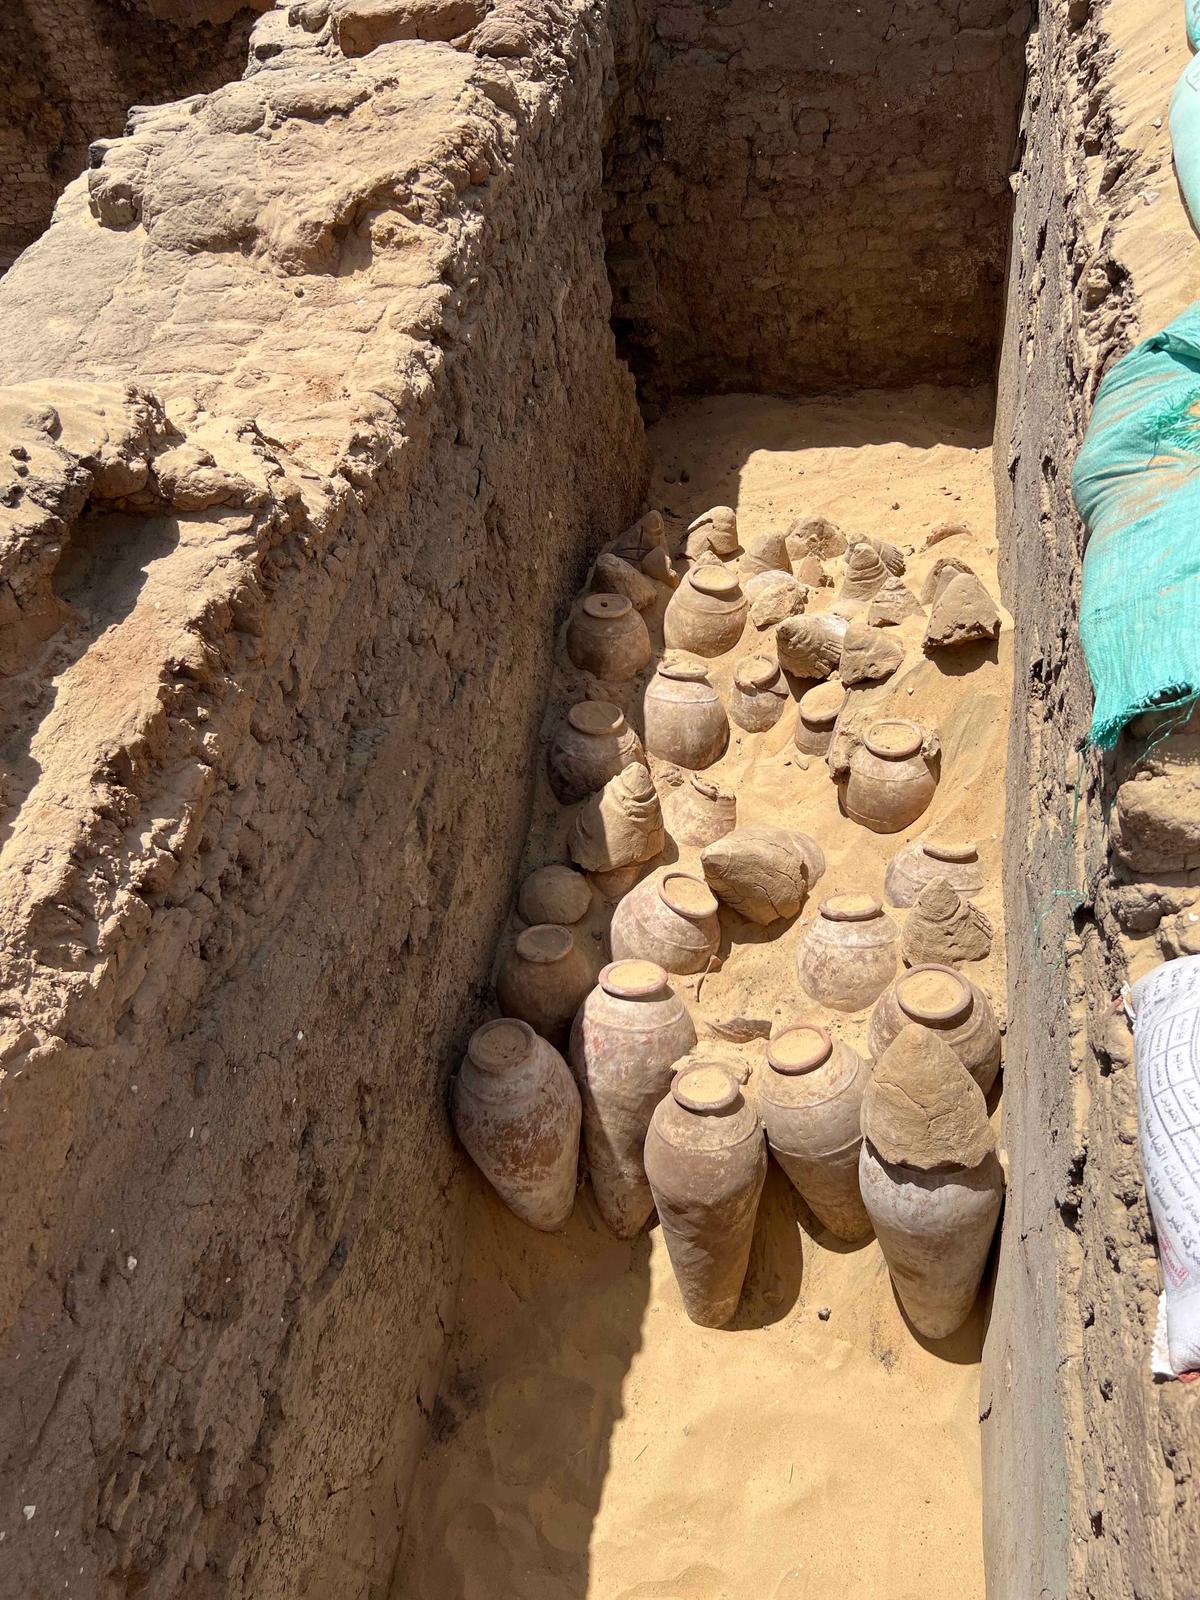 Numerous 5,000-year-old wine jars were found in the tomb of Queen Meret-Neith in Abydos during the excavation. (SWNS)